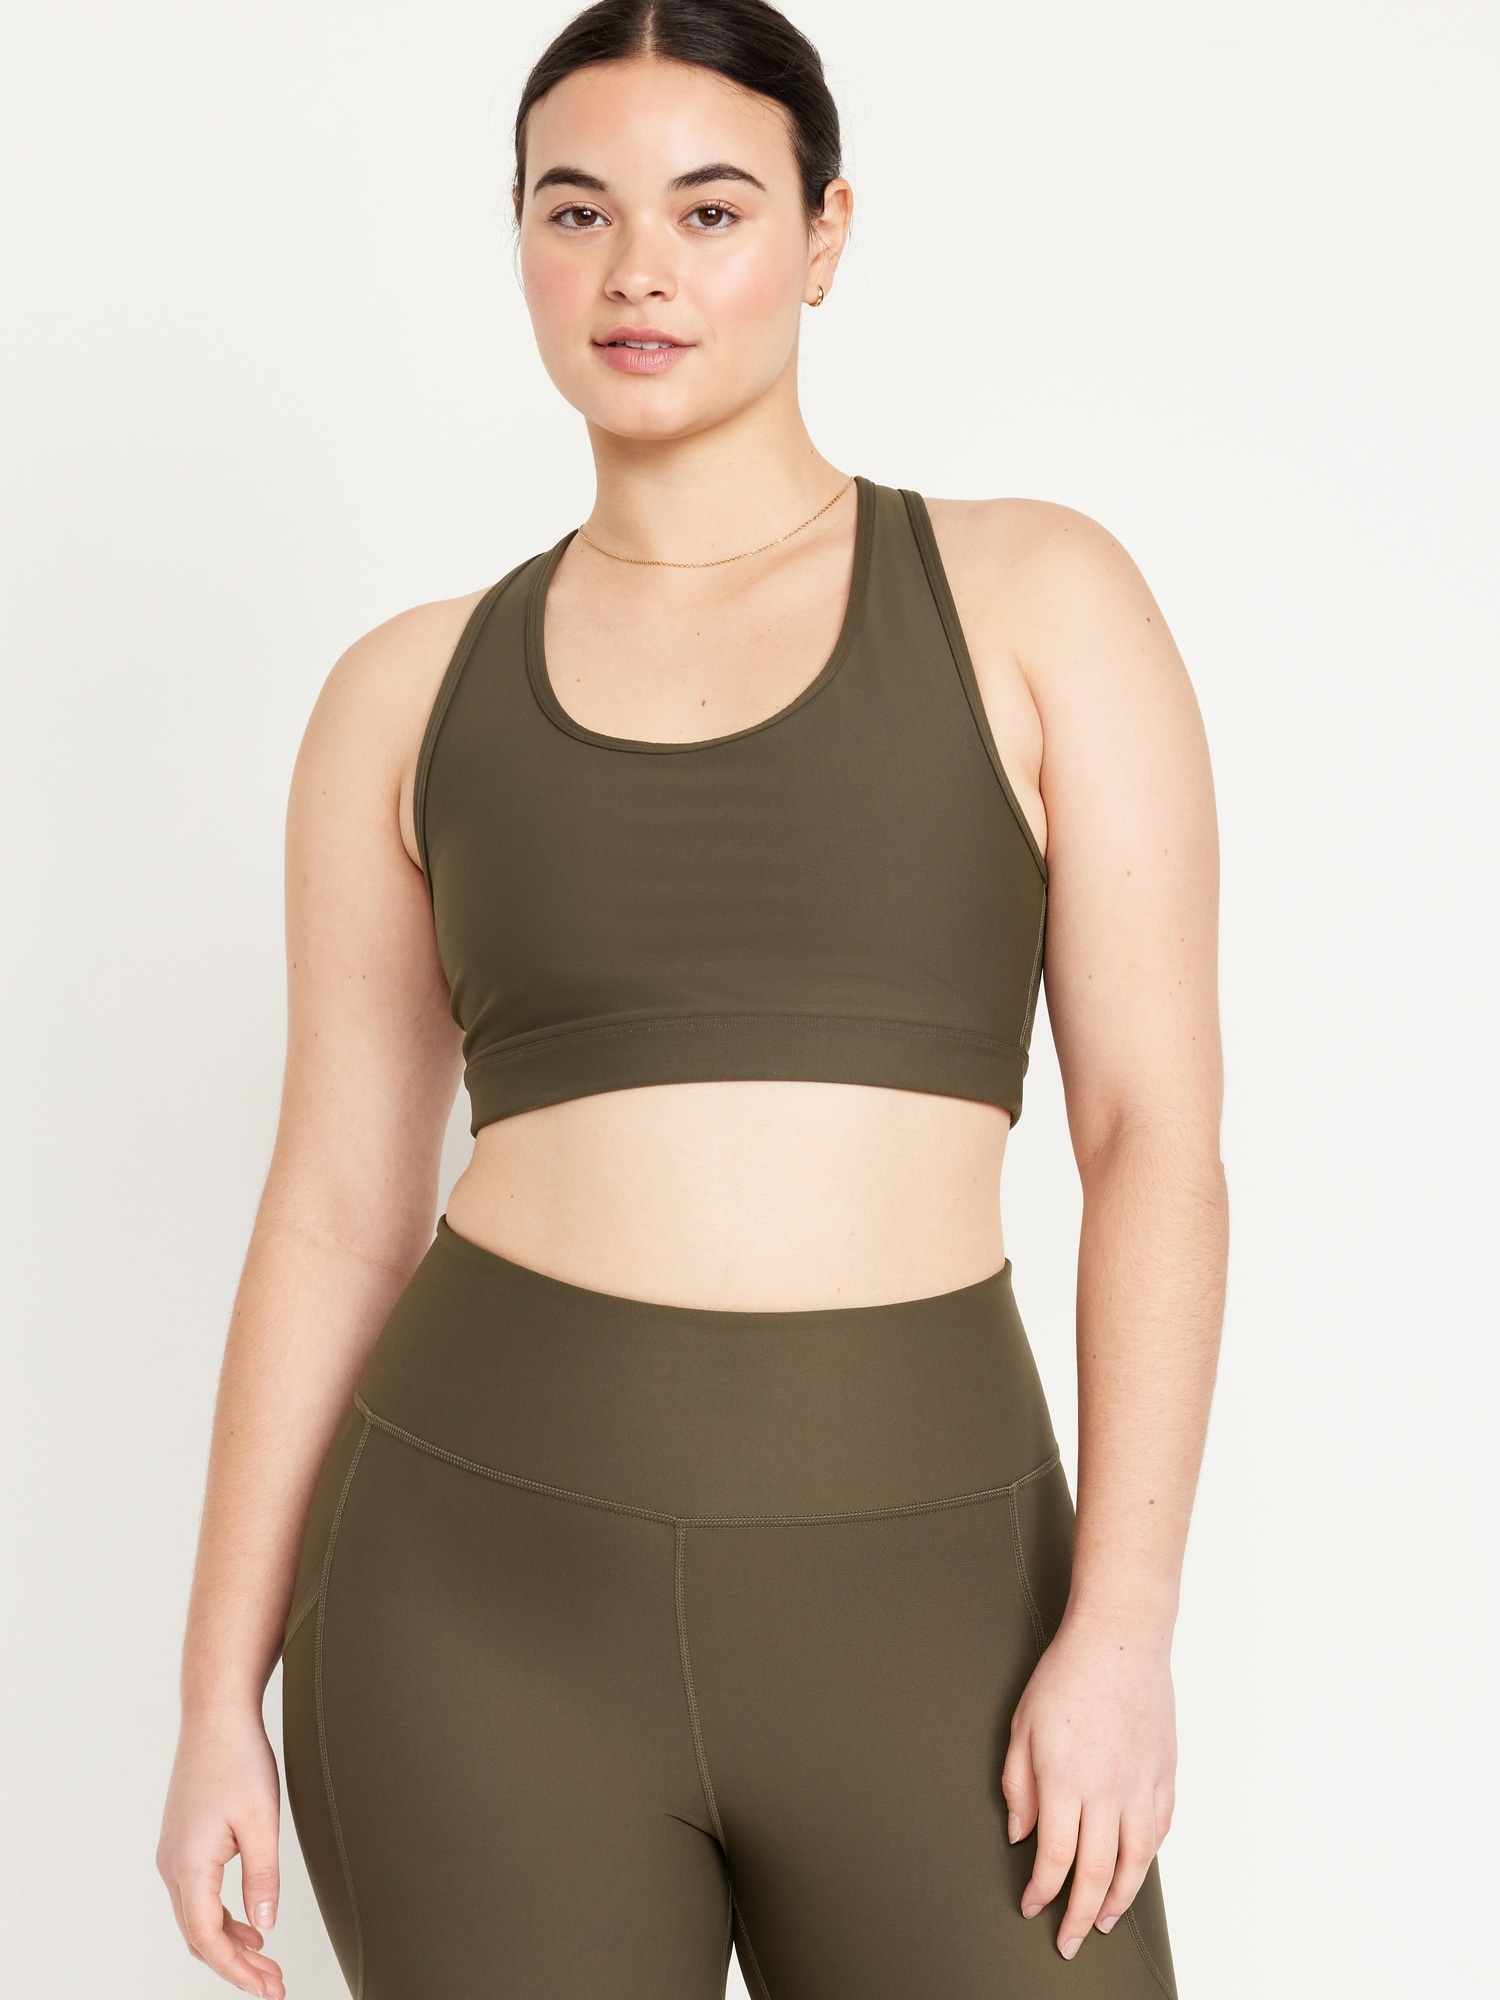 Medium Support Powersoft Sports Bra, My Friends Never Believe Me When I  Tell Them These Are My Favourite Workout Clothes